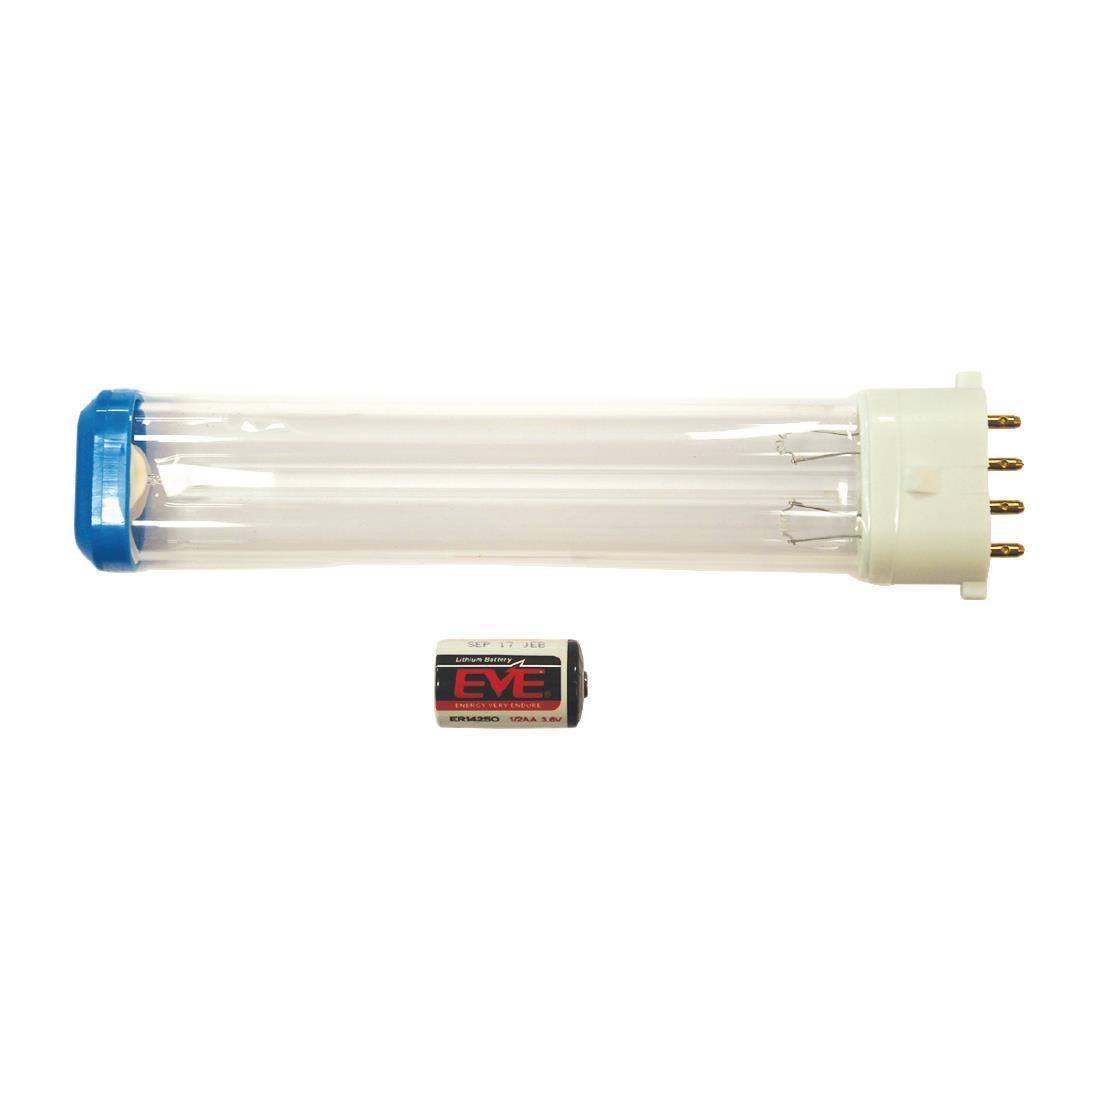 Steelite HyGenikx System Shatter-proof Replacement Lamp and Battery Blue Cap HGX-20-F - FE692  - 1